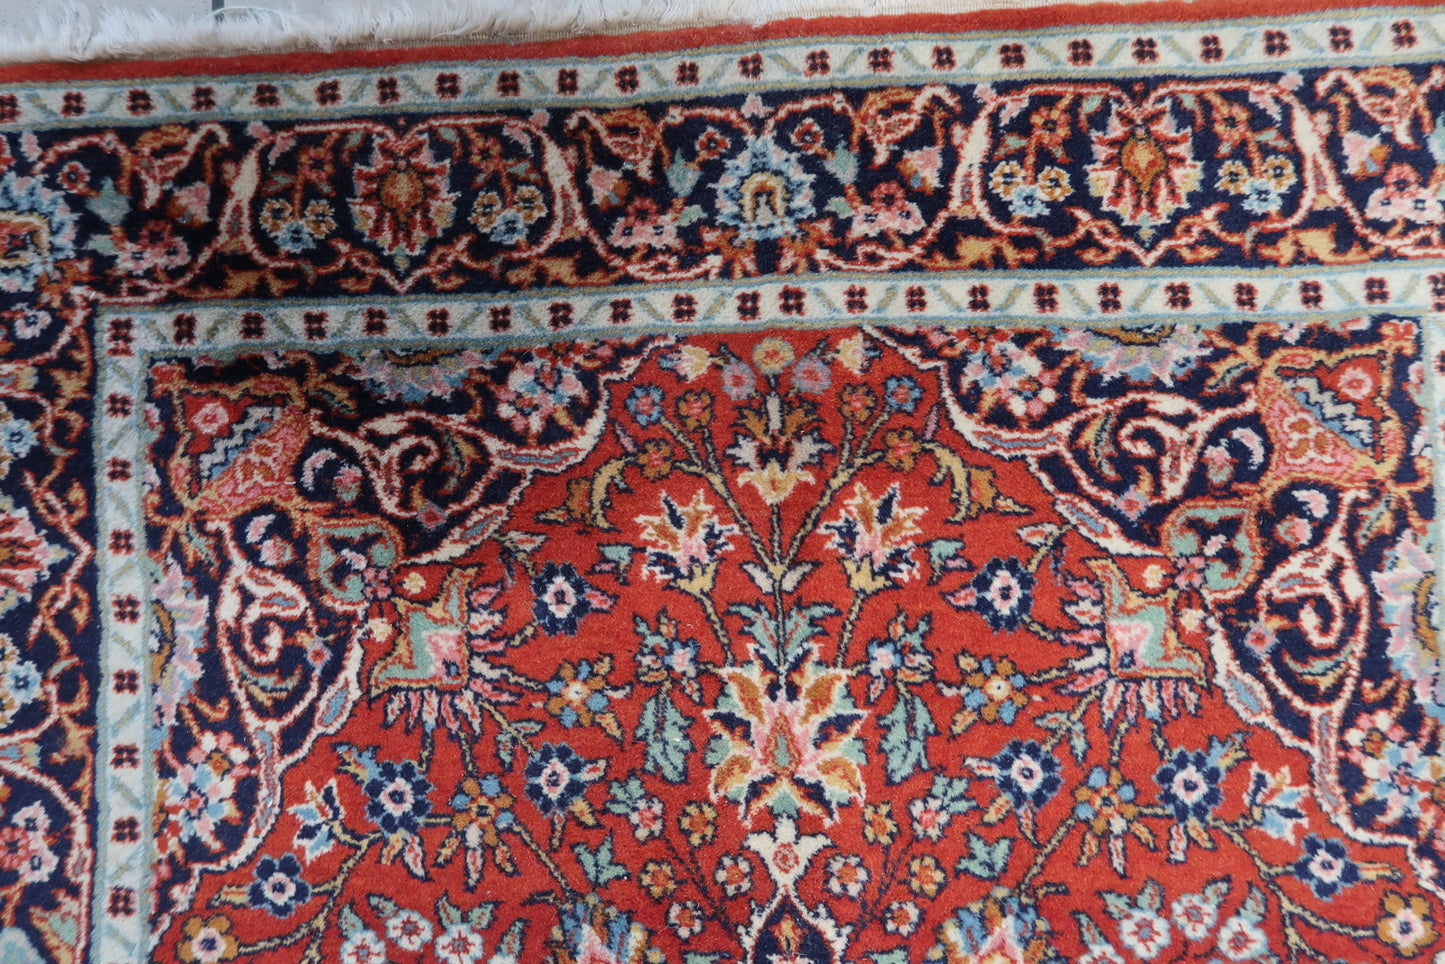 Detailed shot showcasing the intricate weaving technique and artistic flair of the rug.